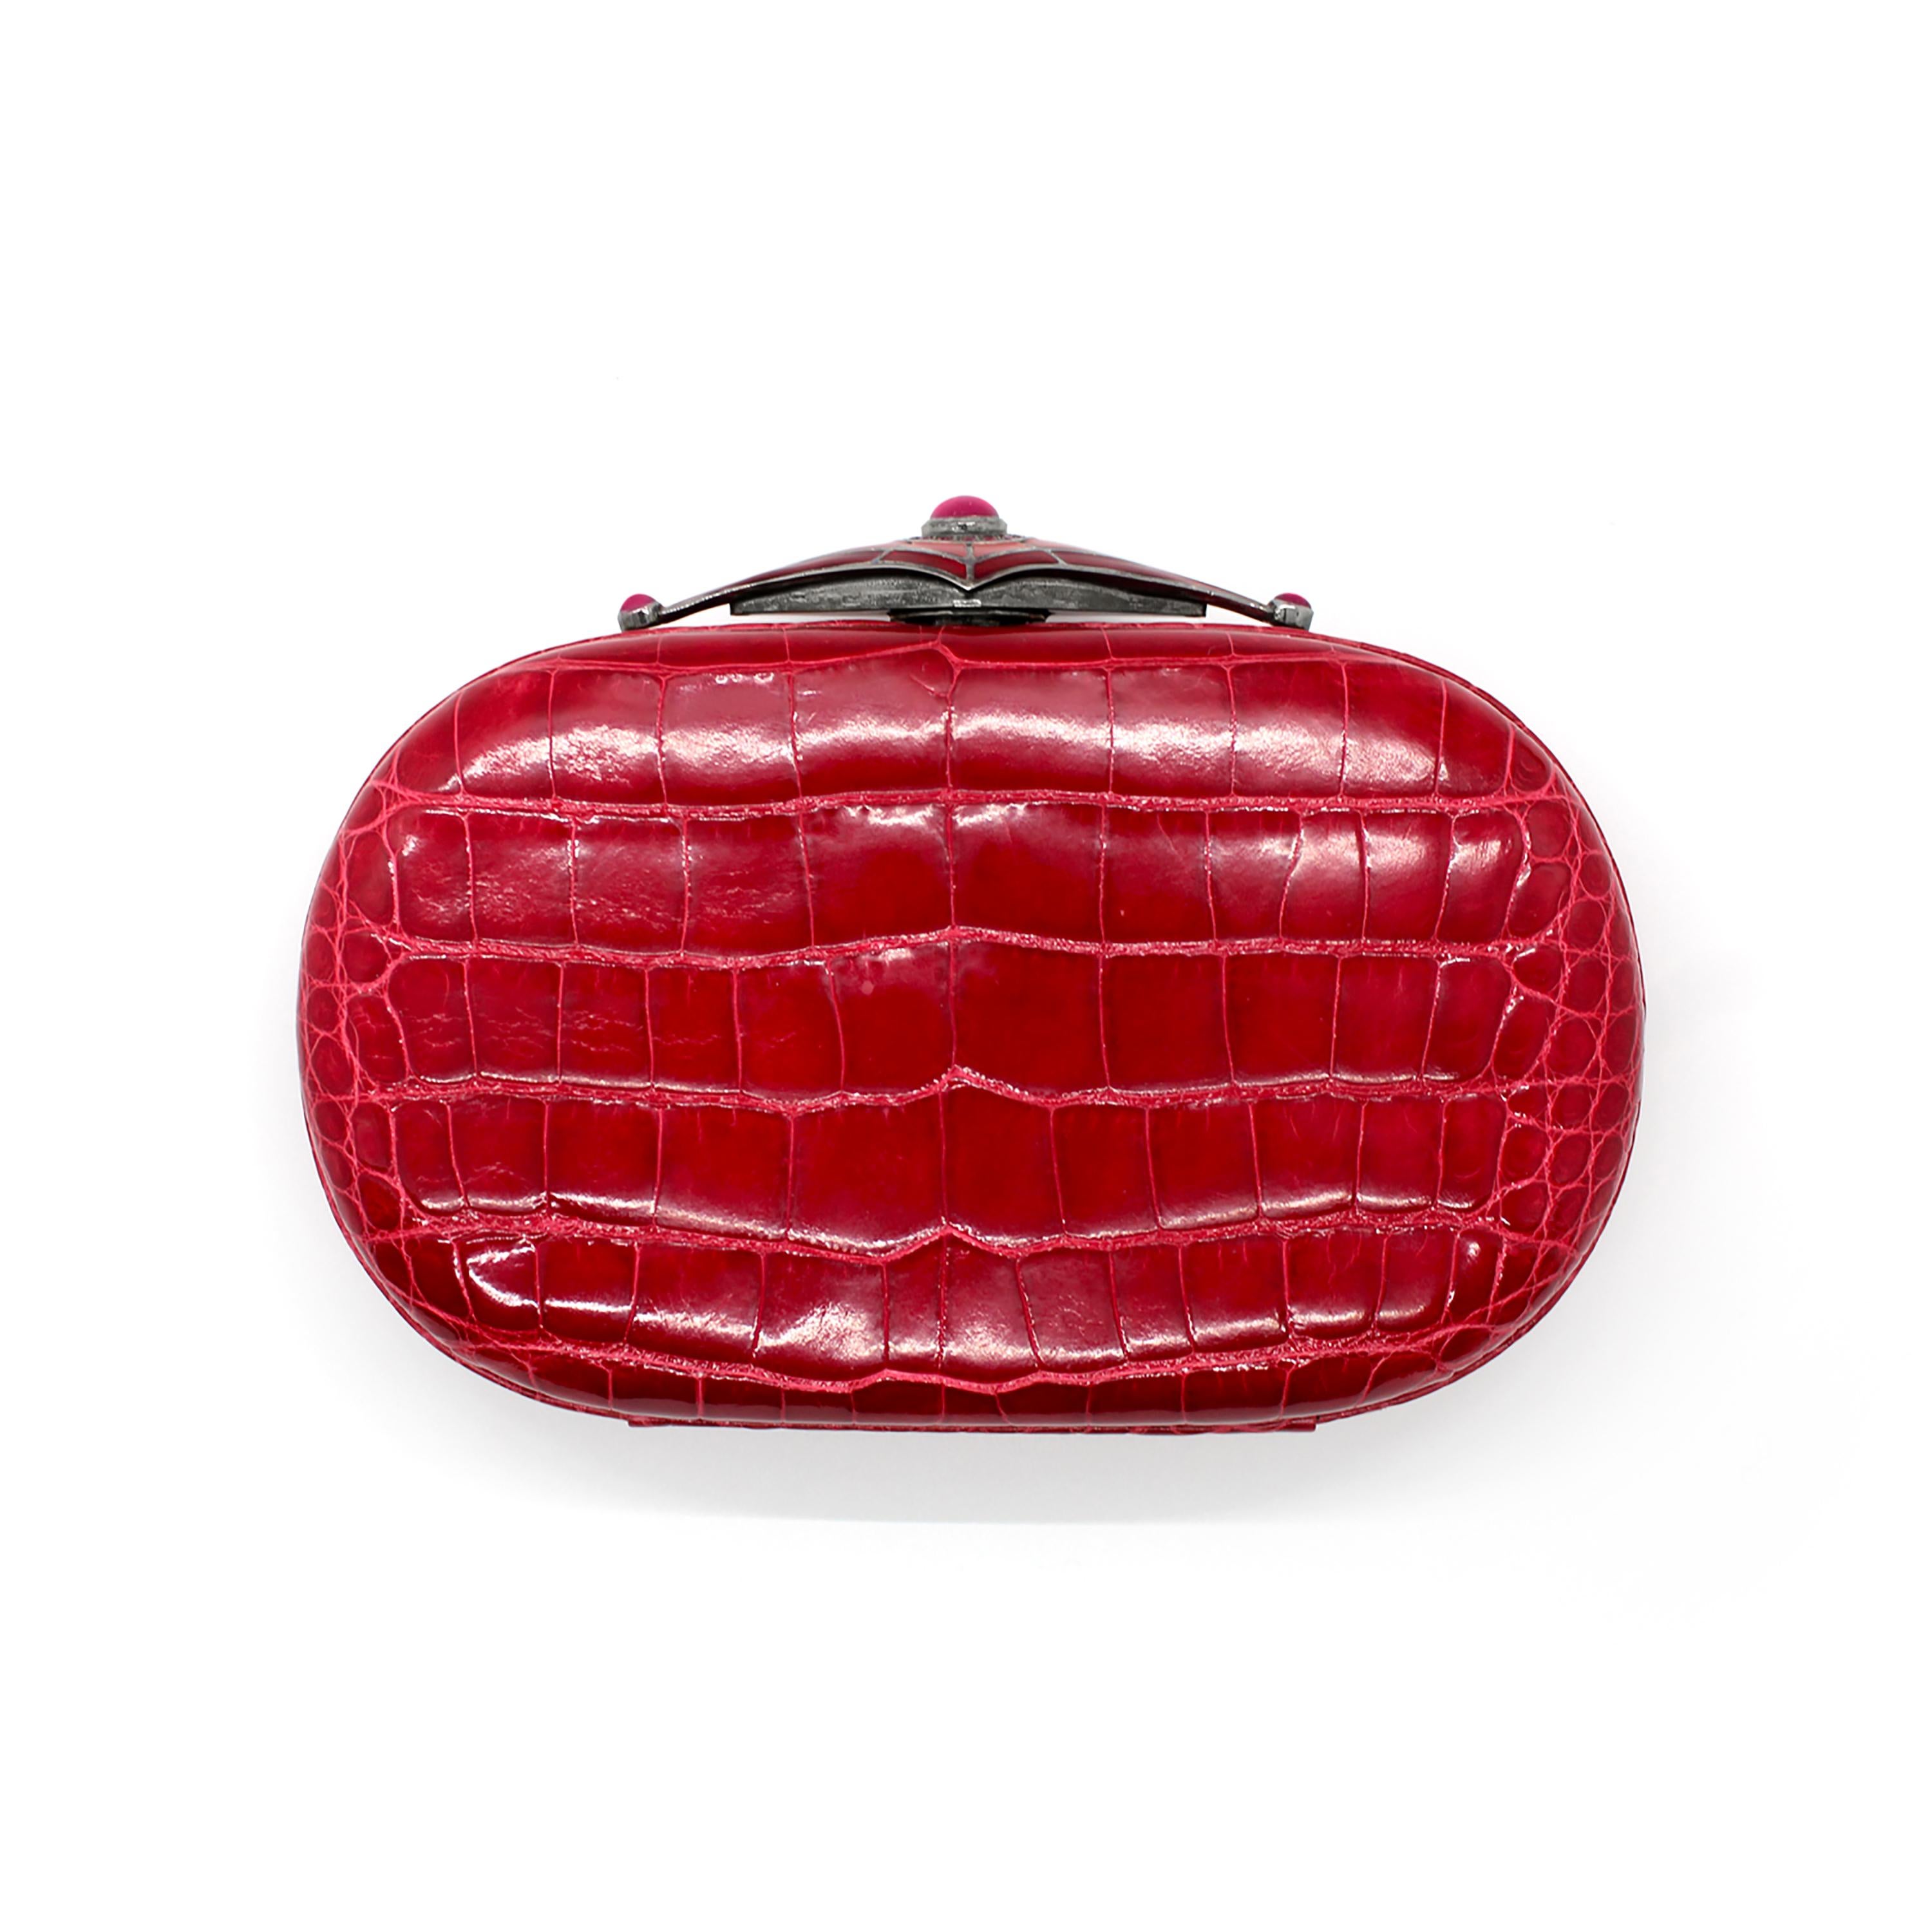 One of a kind, 20th-century sterling silver Guilloché enamel clasp red exotic alligator skin Minaudière
Silver Clasp pave set with red rubies weighing 1.50 carats, blackened
Bezel set cabochon ruby weighing 6 carats
11